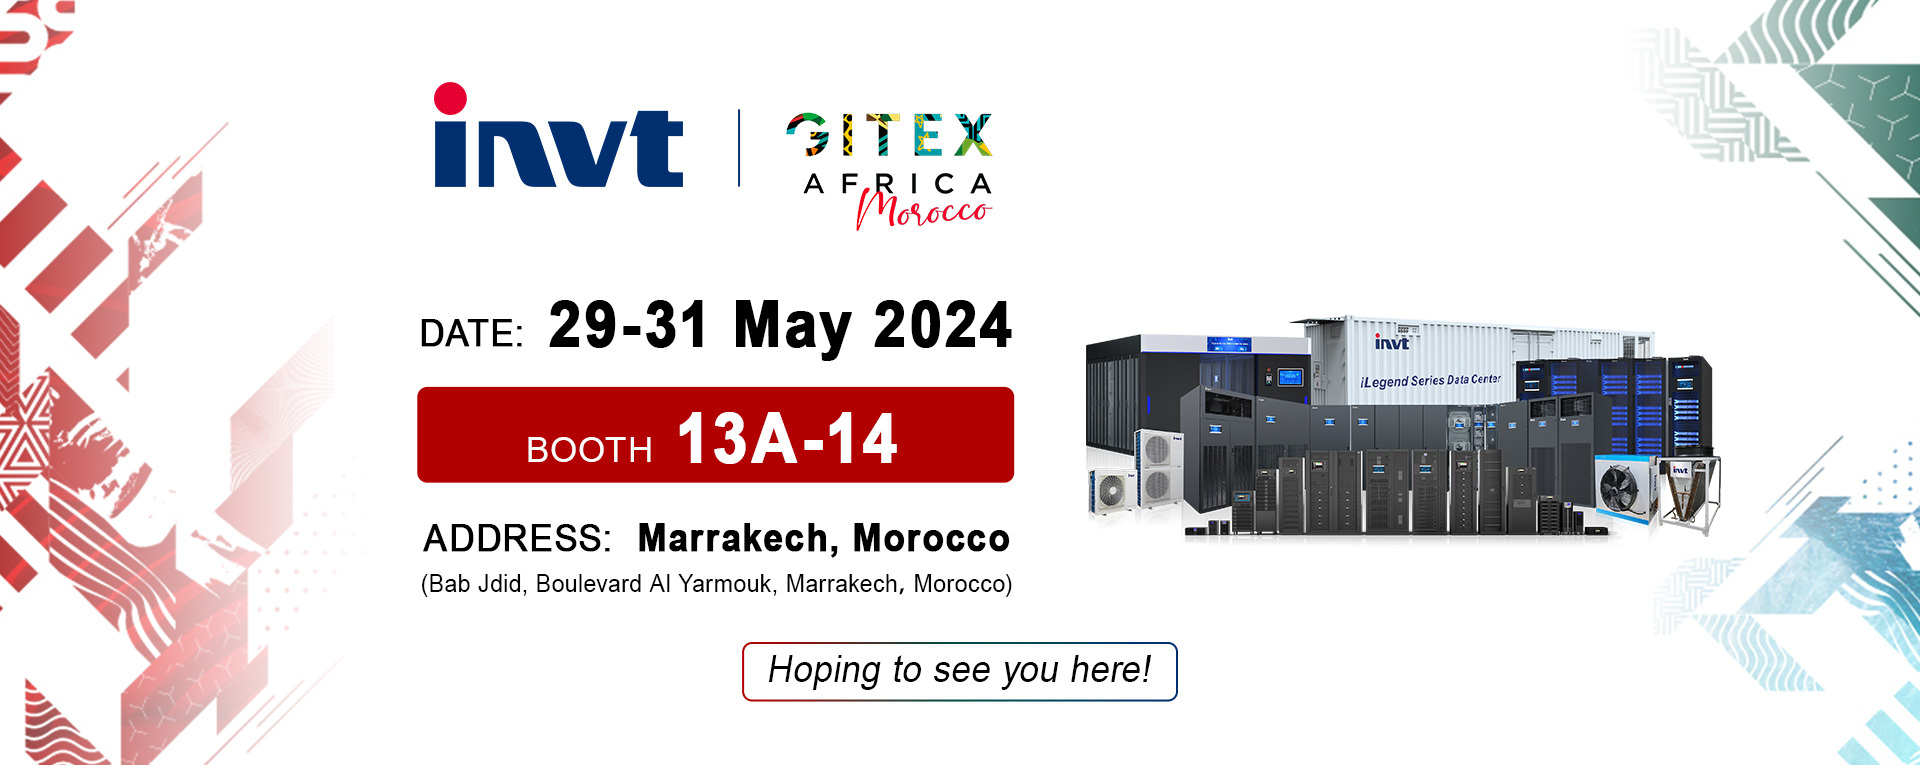 INVT hopes to see you at GITEX AFRICA 2024!